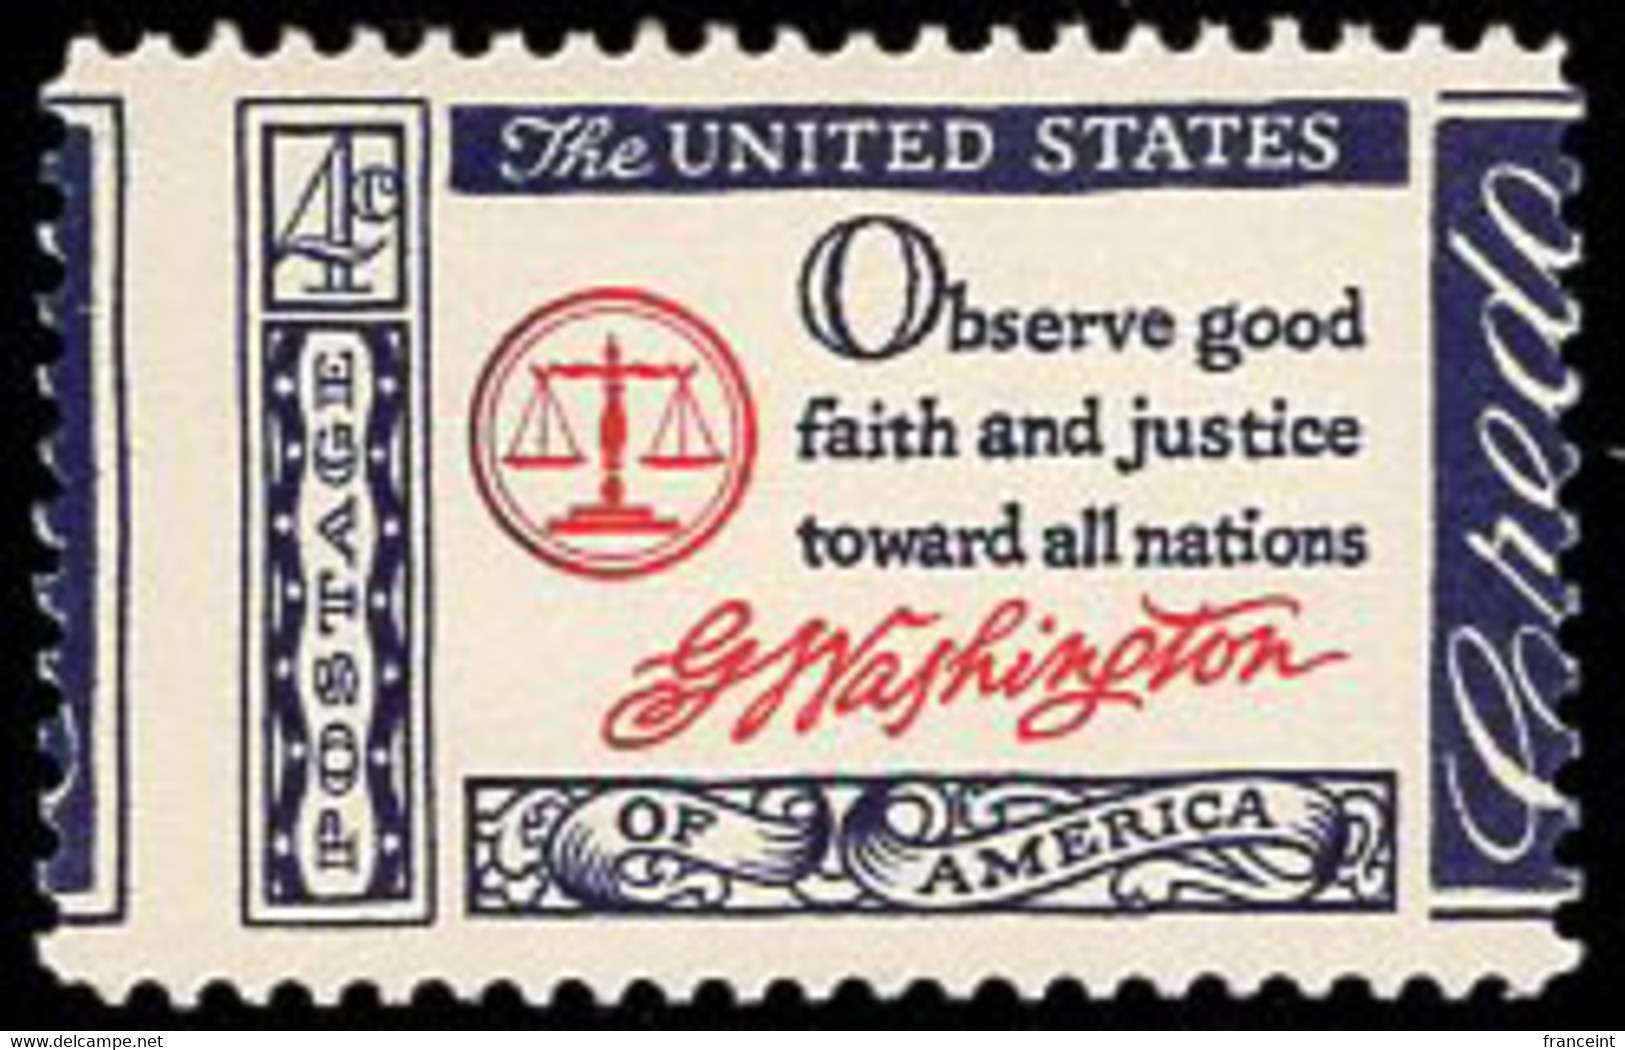 U.S.A.(1960) Washington Credo. Vertical Perforation Shift Resulting In Part Of Stamp Appearing On Opposite Side. Sc 1139 - Errors, Freaks & Oddities (EFOs)